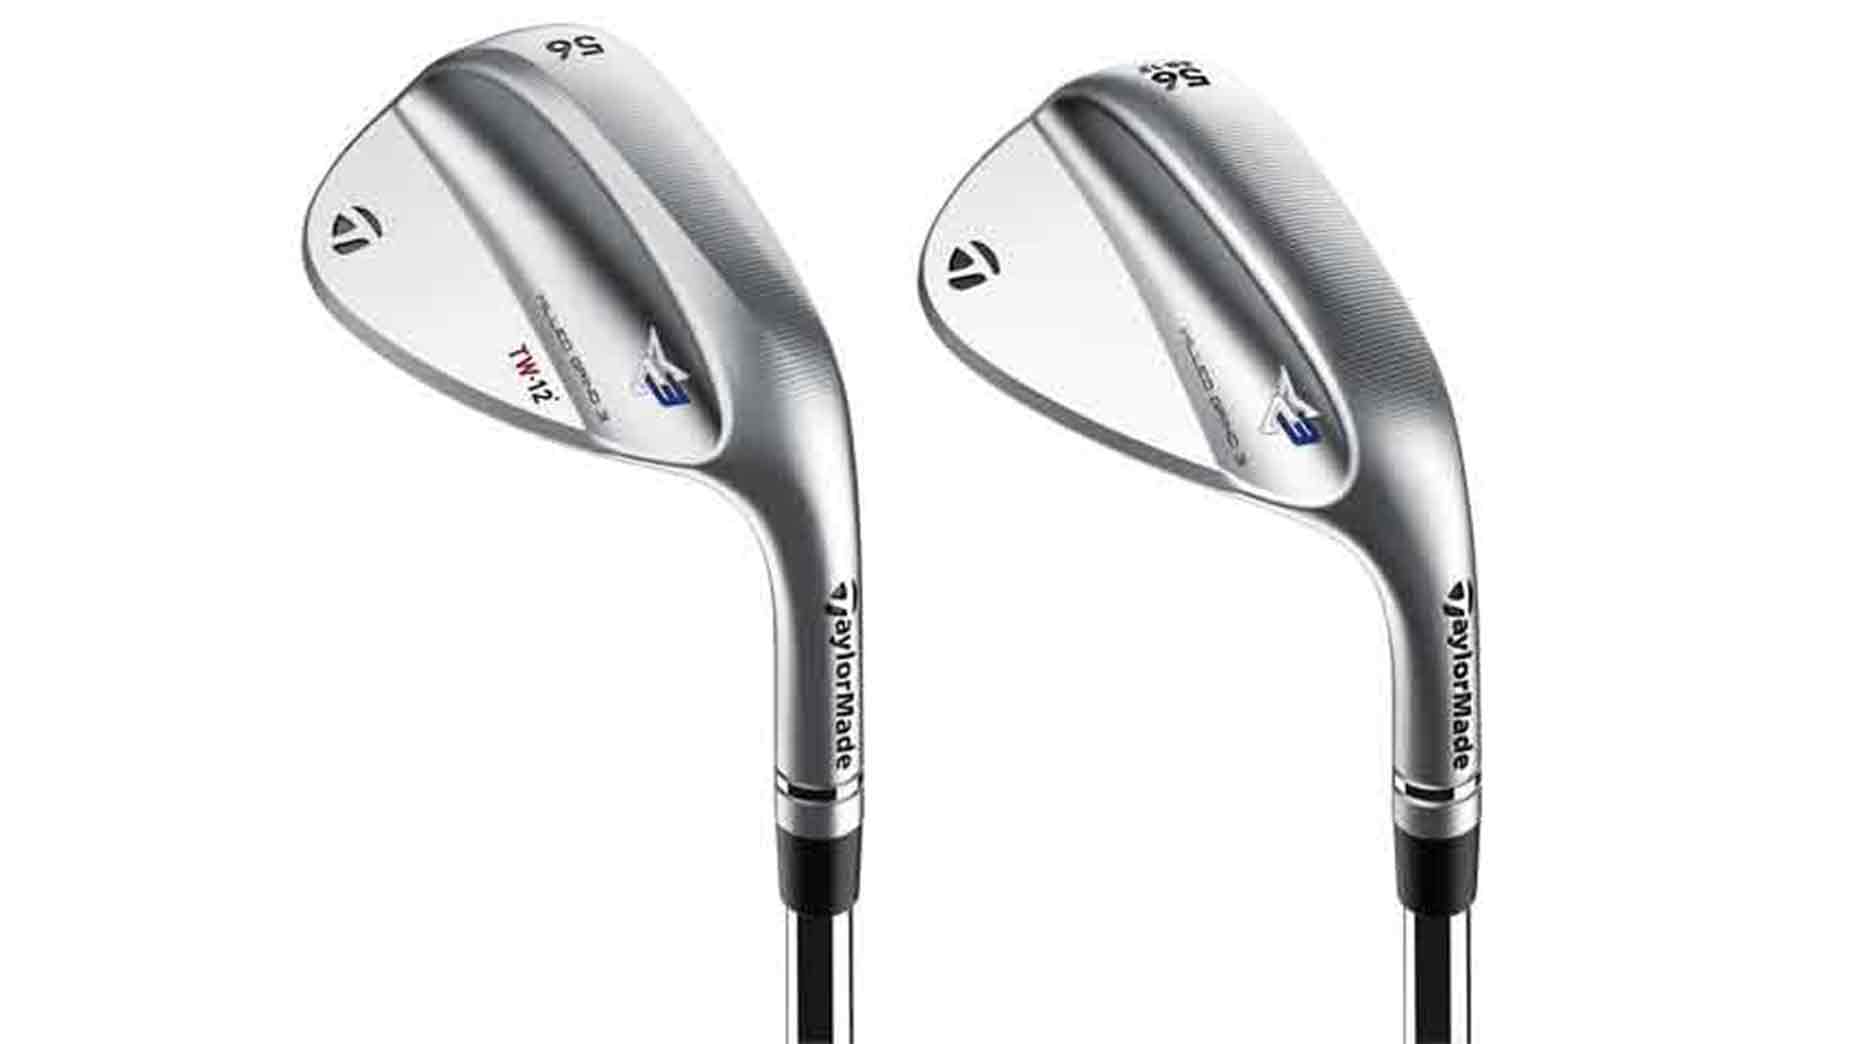 New TaylorMade MG3 wedges tested and reviewed: ClubTest 2022